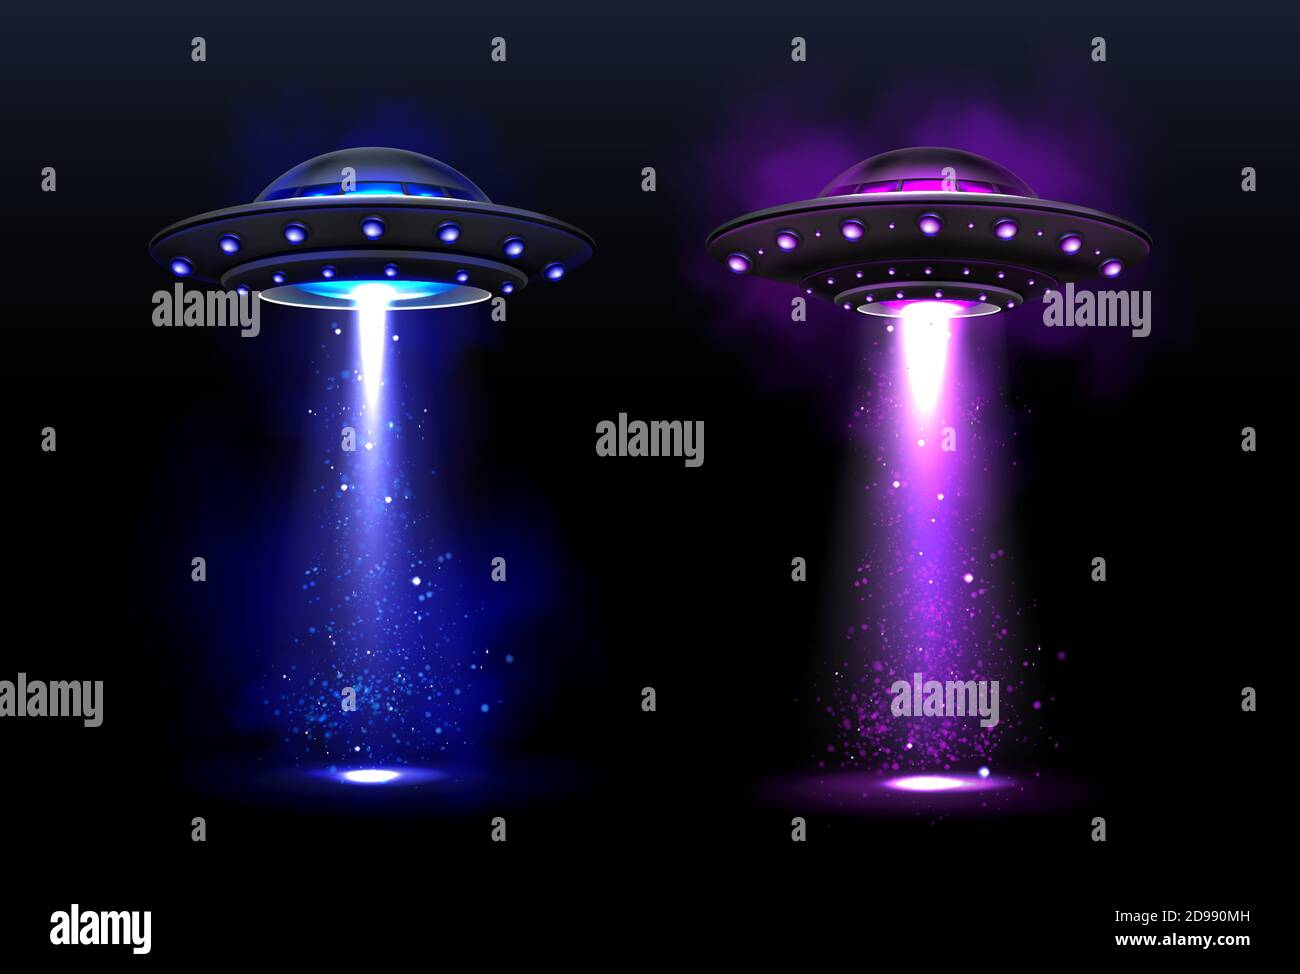 Alien spaceships, ufo with blue and purple light beam. Vector realistic illustration of futuristic flying saucer, unidentified round rocket. Clipart of galaxy spacecraft, glow rocketship Stock Vector